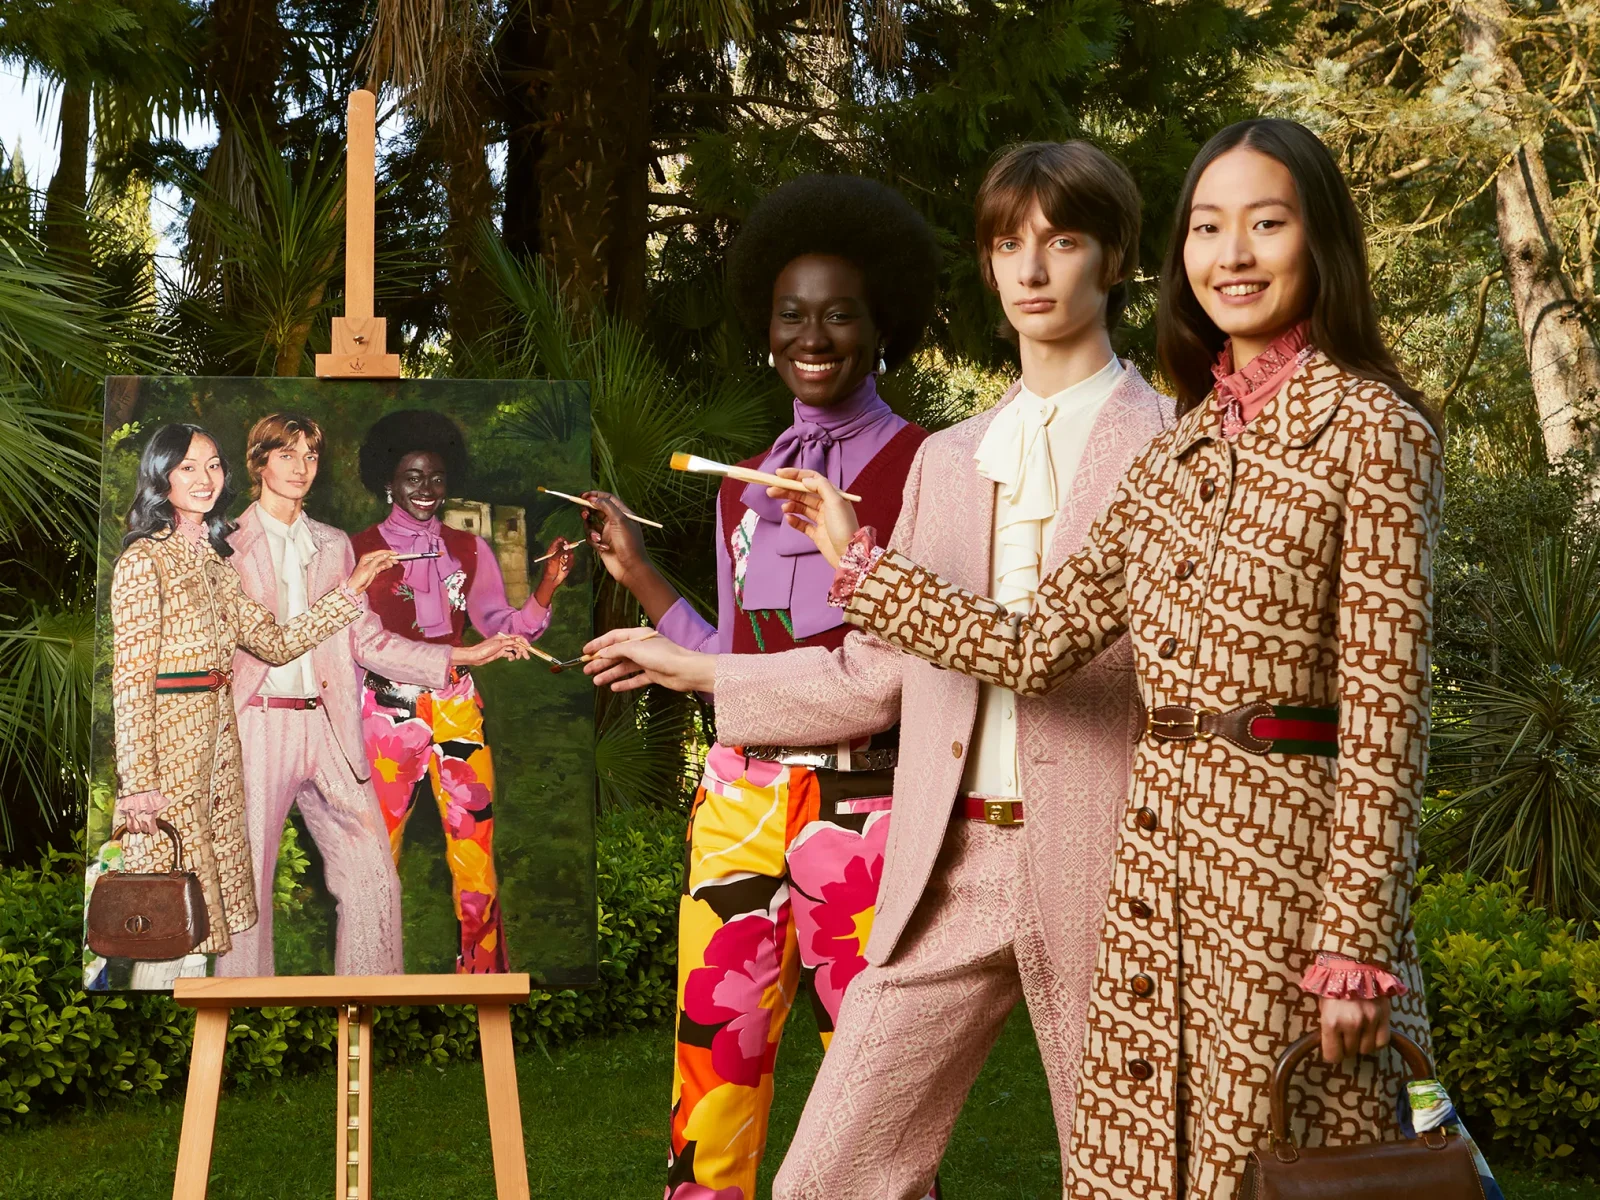 Gucci and the RealReal Announce Partnership As Demand in